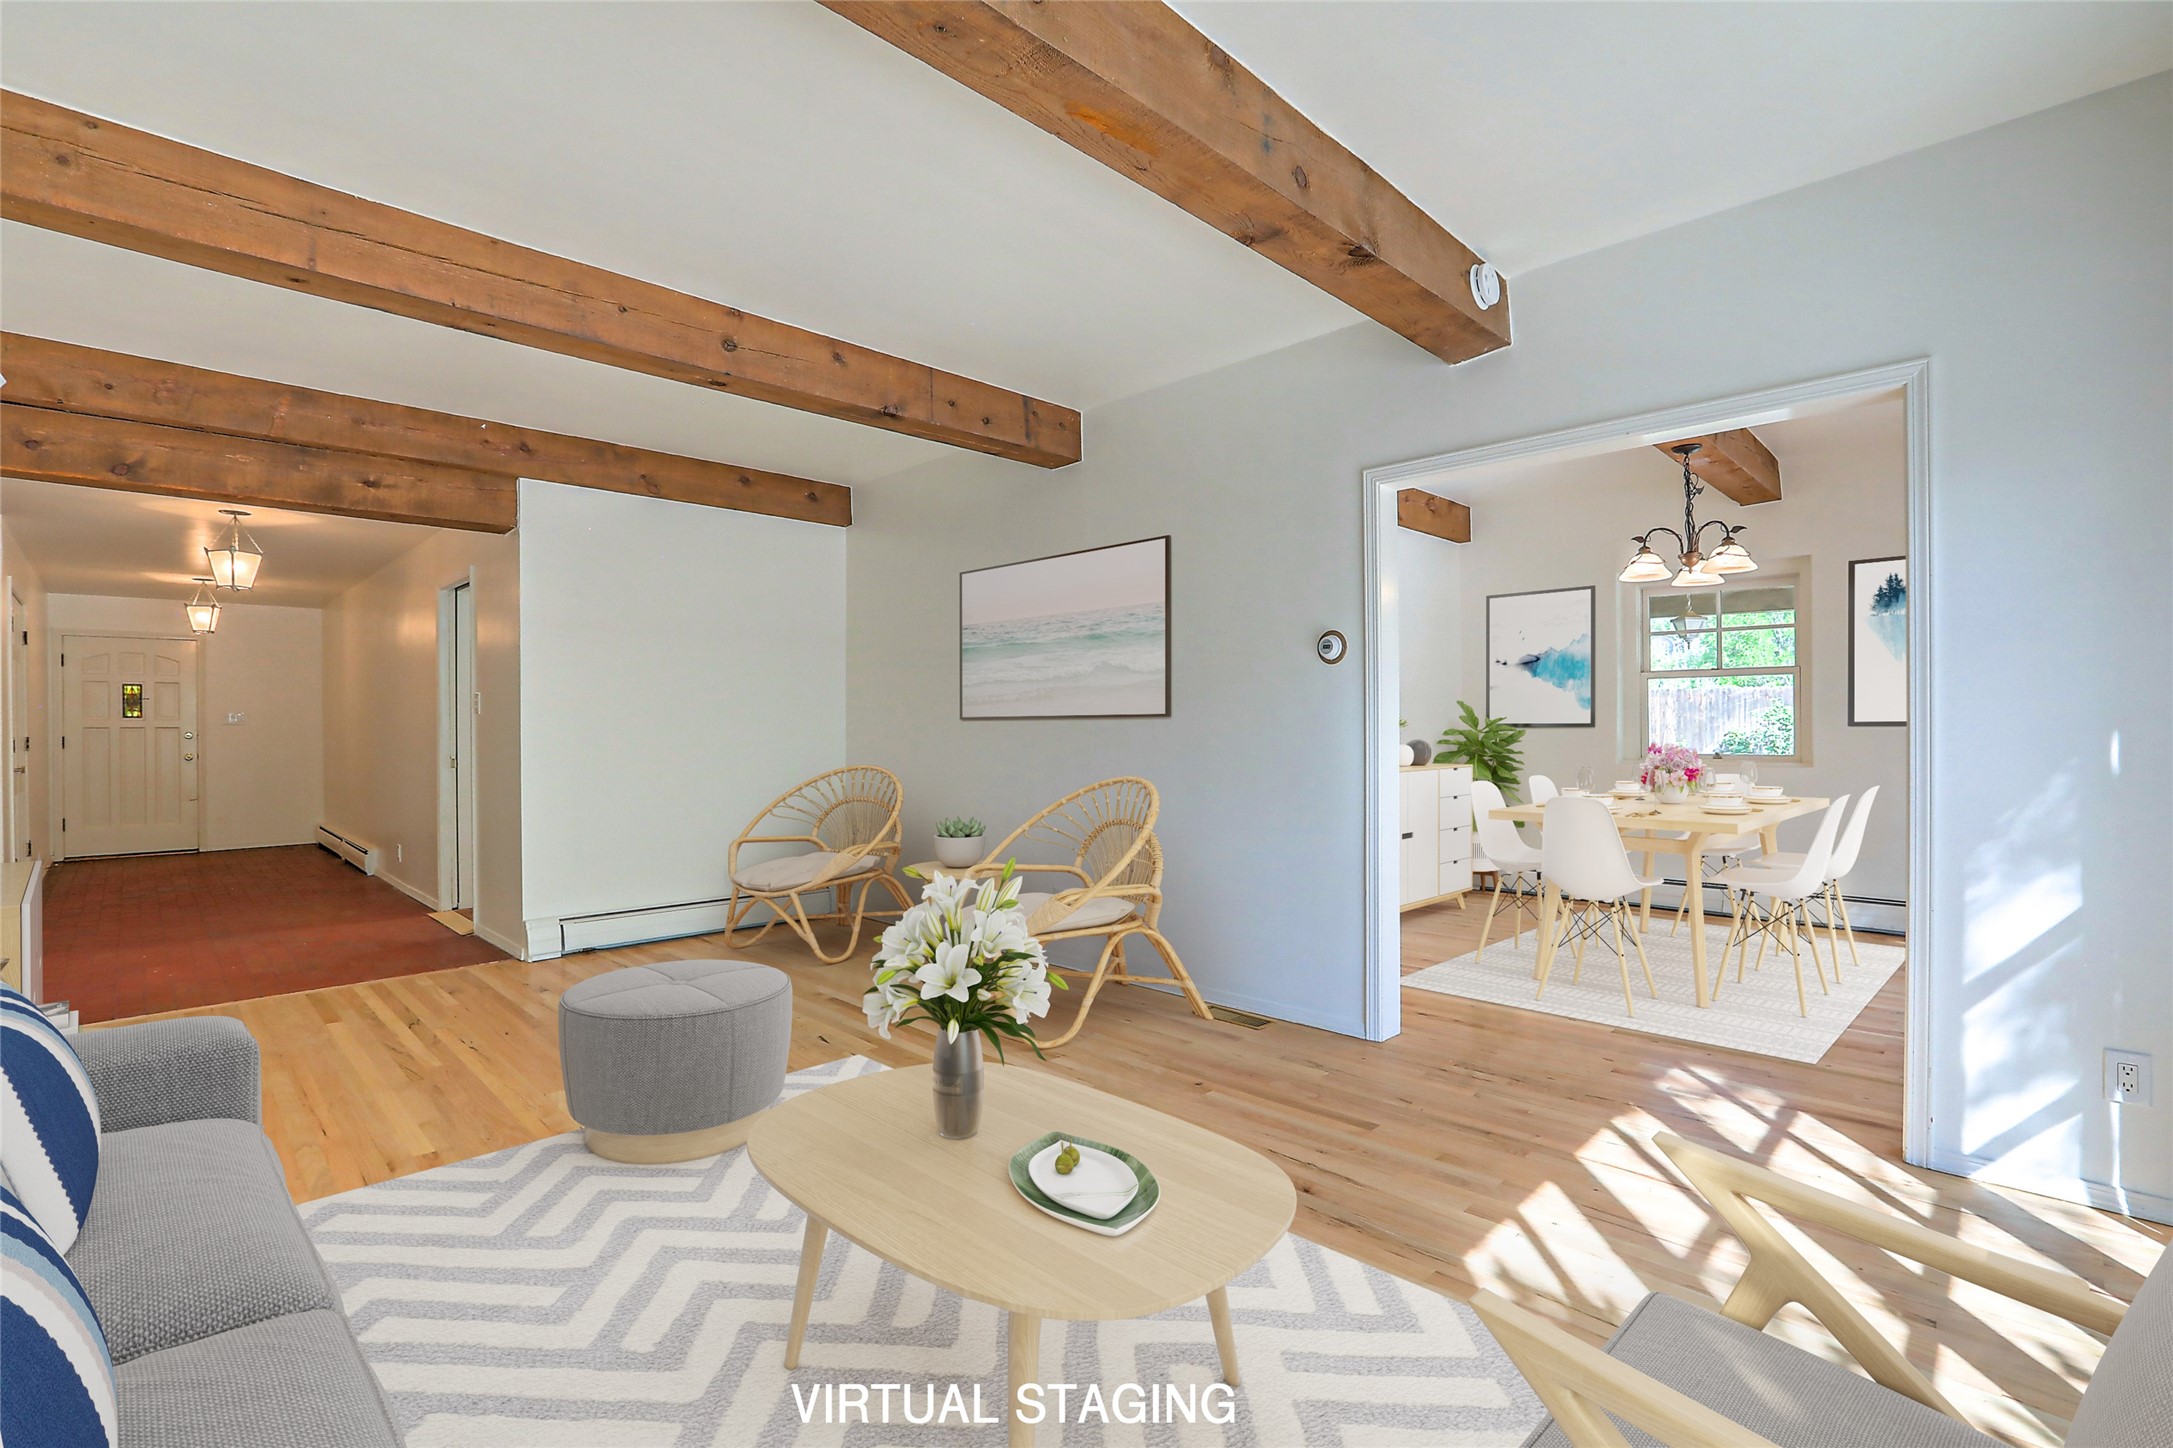 Virtual Staging living room with beamed ceiling